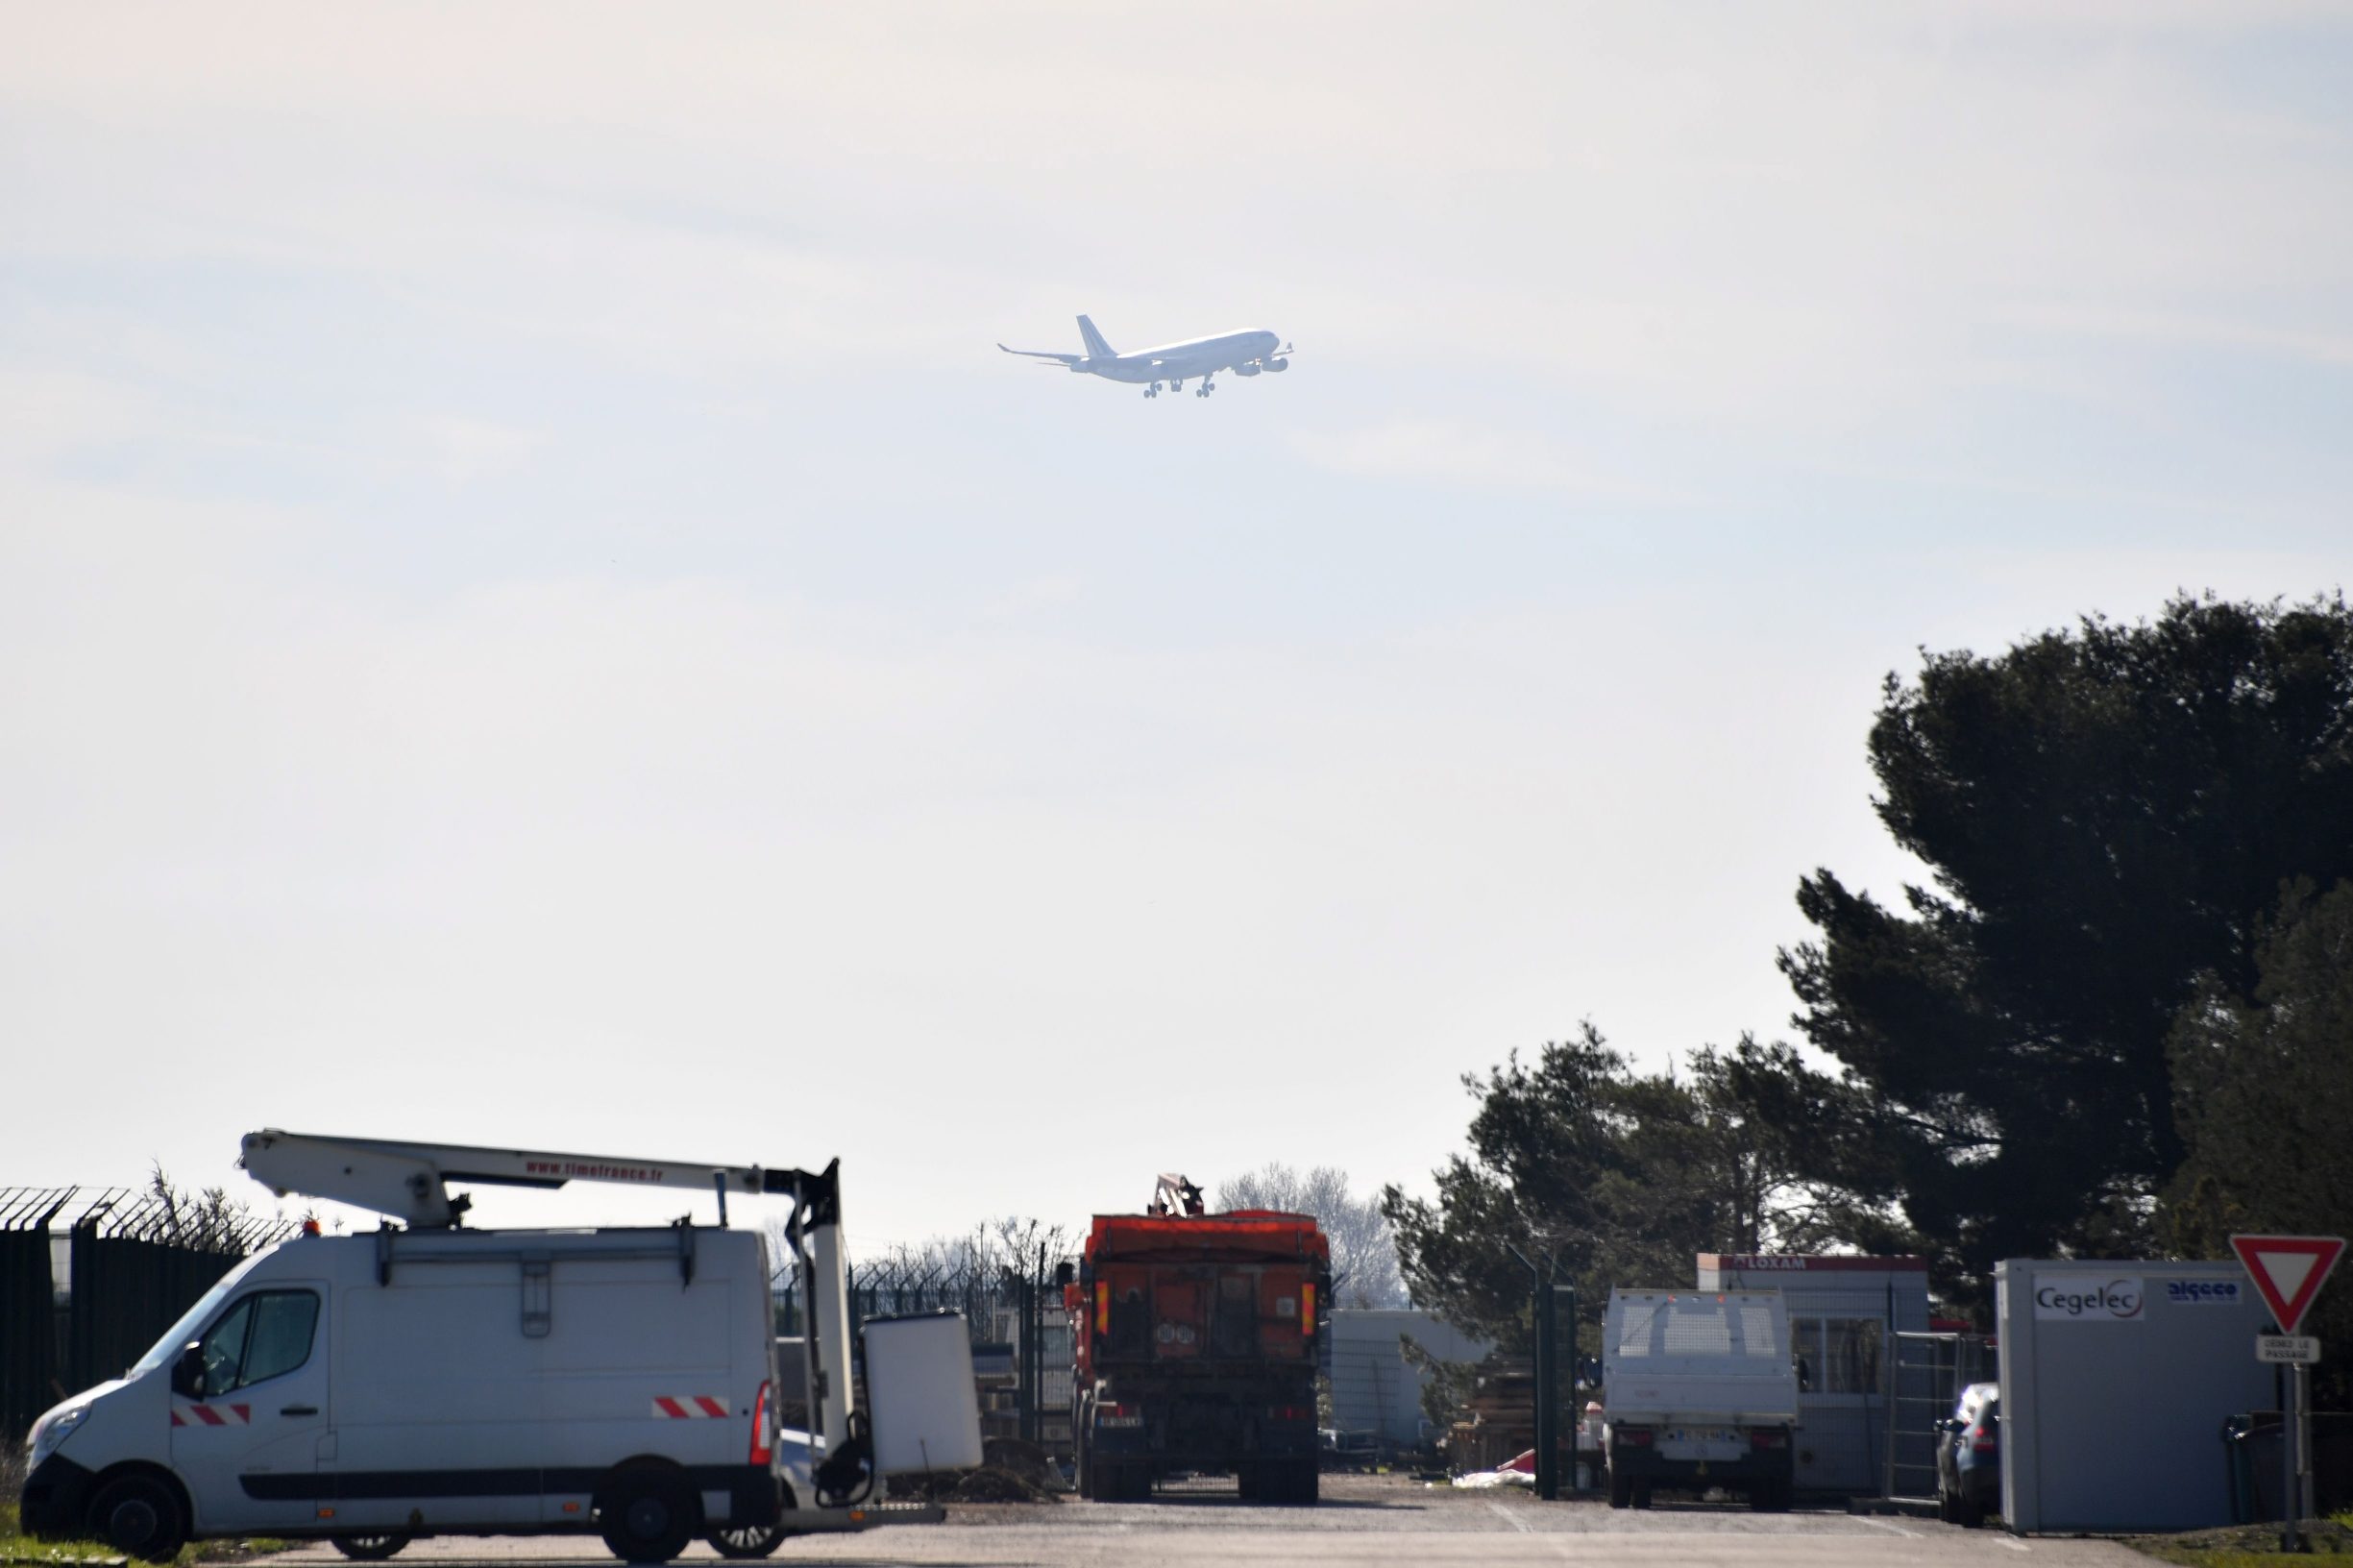 A picture taken on January 31, 2020 shows a plane said to be carrying French citizens who are repatriated from the coronavirus hot zone in Wuhan, China, as it approaches the Istres-Le Tube Air Base near Istres, northwest of Marseille, southern France. - A plane carrying around 200 French citizens flew out of virus-hit Wuhan on January 31 and landed at the air base near Istres. (Photo by Pascal GUYOT / AFP)